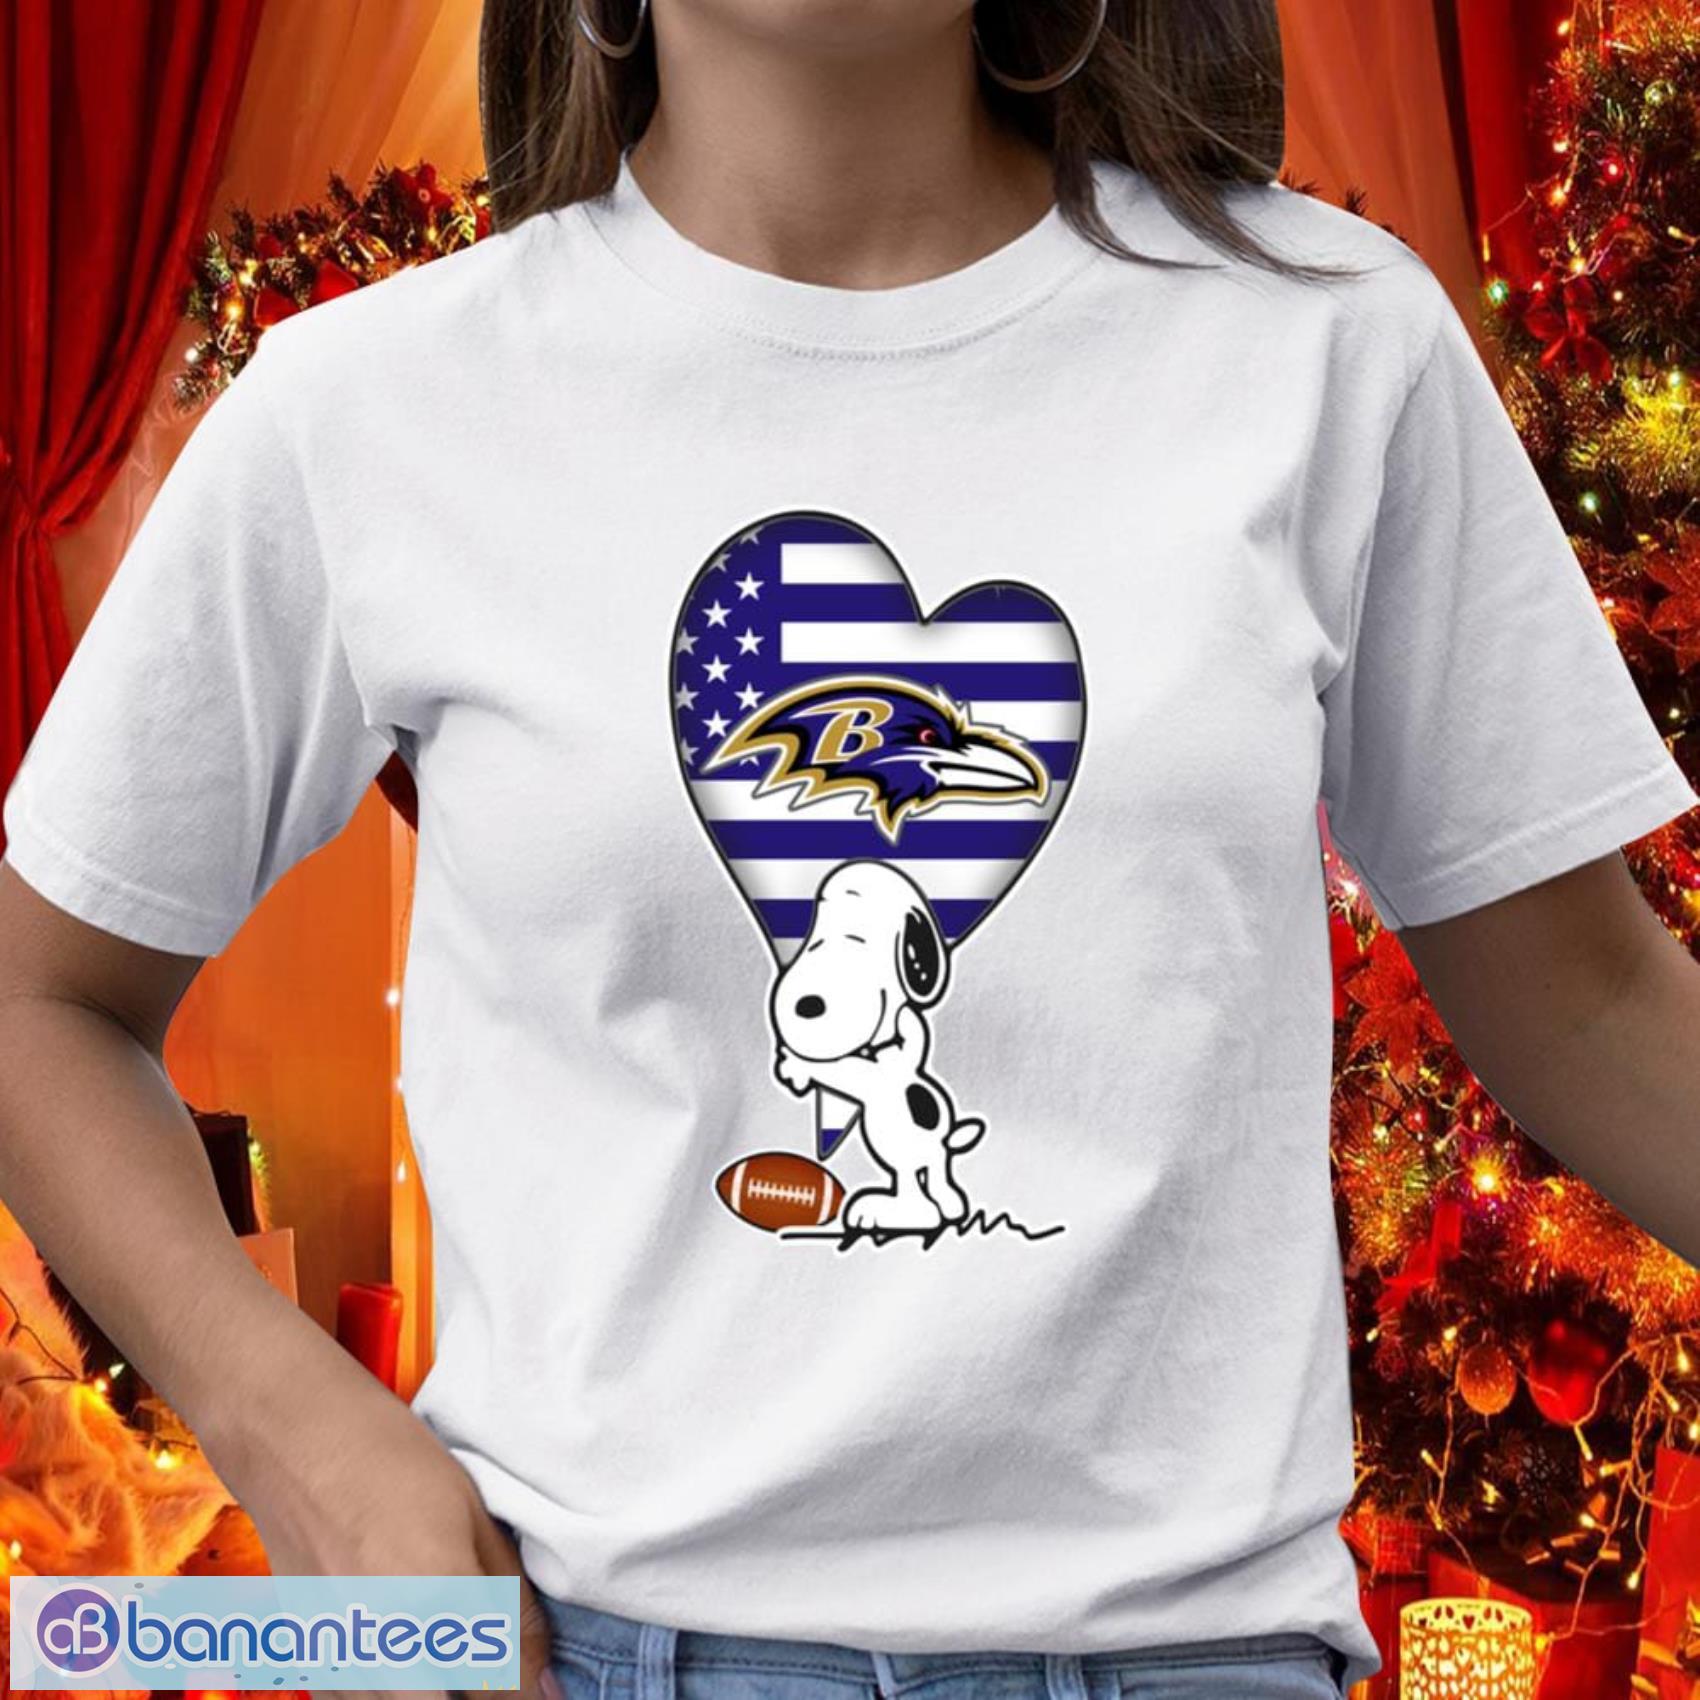 Baltimore Ravens NFL Football Gift Fr Fans The Peanuts Movie Adorable Snoopy T Shirt - Baltimore Ravens NFL Football The Peanuts Movie Adorable Snoopy T Shirt_1